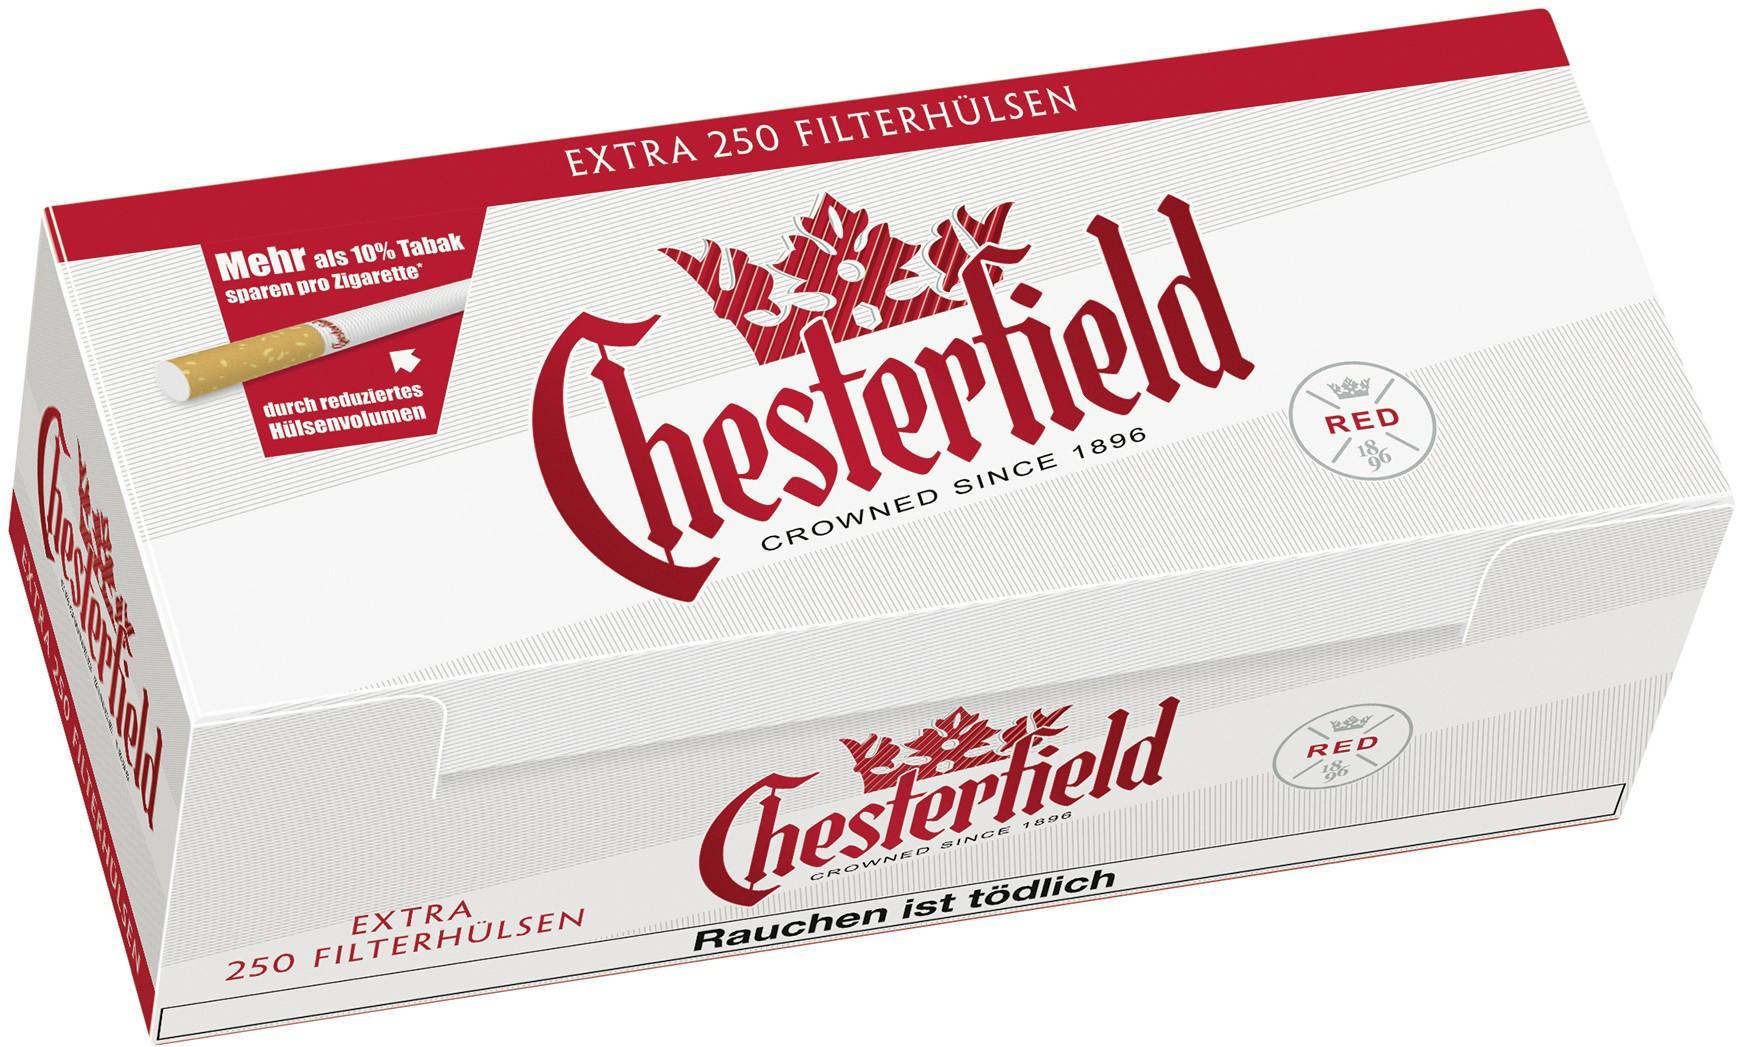 1x Chesterfield Red Extra Hülsen